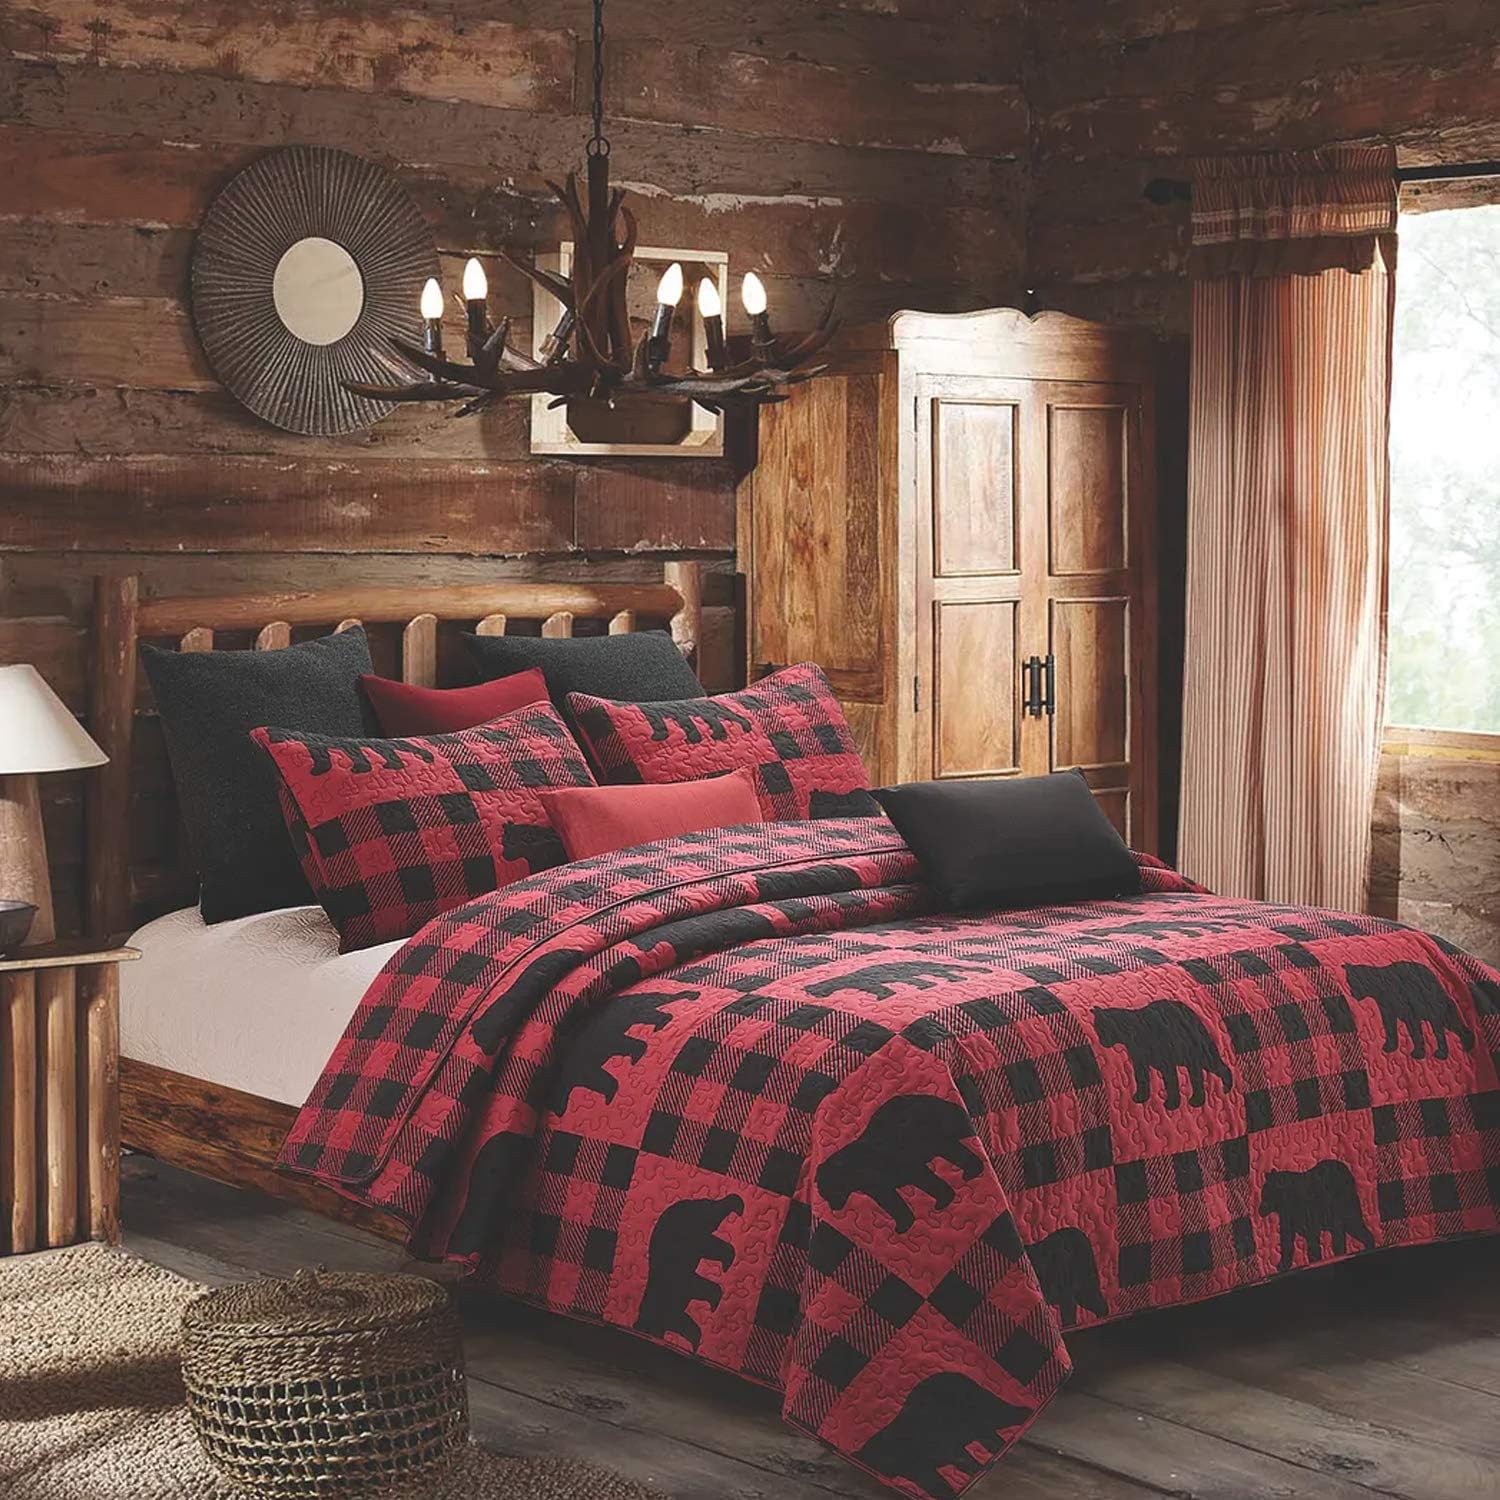 Virah Bella 3 Piece King Lodge Quilt Bedding Set - Buffalo Bear Plaid Red - Rustic Cabin Country Reversible Camping Comforter Set with Decorative Pillow Shams, Red/Black